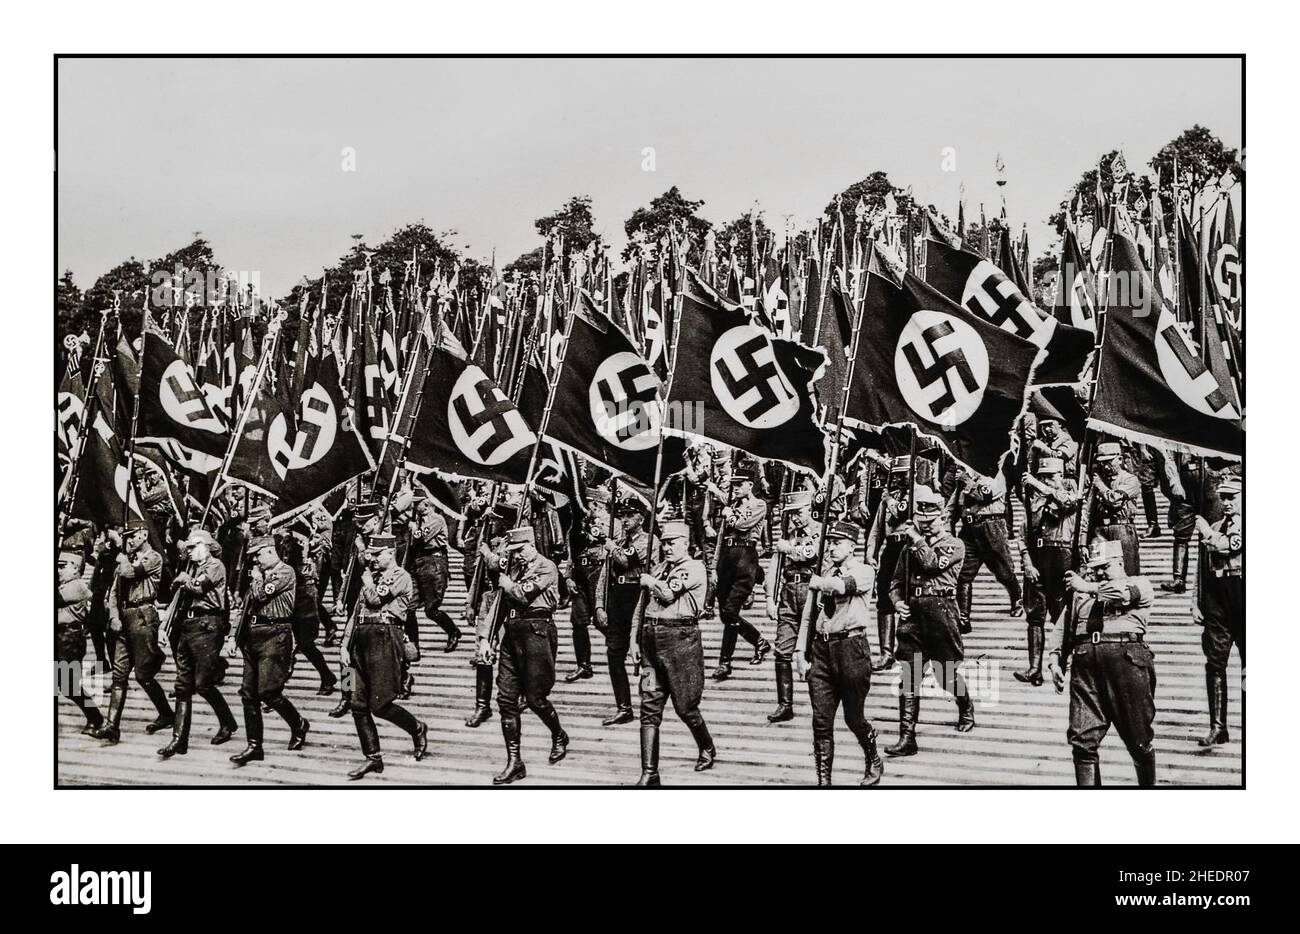 The Sturmabteilung, or SA, a paramilitary organization associated with the Nazi Party. S.A. stormtroopers, or 'brownshirts', in Nuremberg Germany, swastika flag bearers at the Nazis’ Party Day in Nuremberg , 1933. Stock Photo